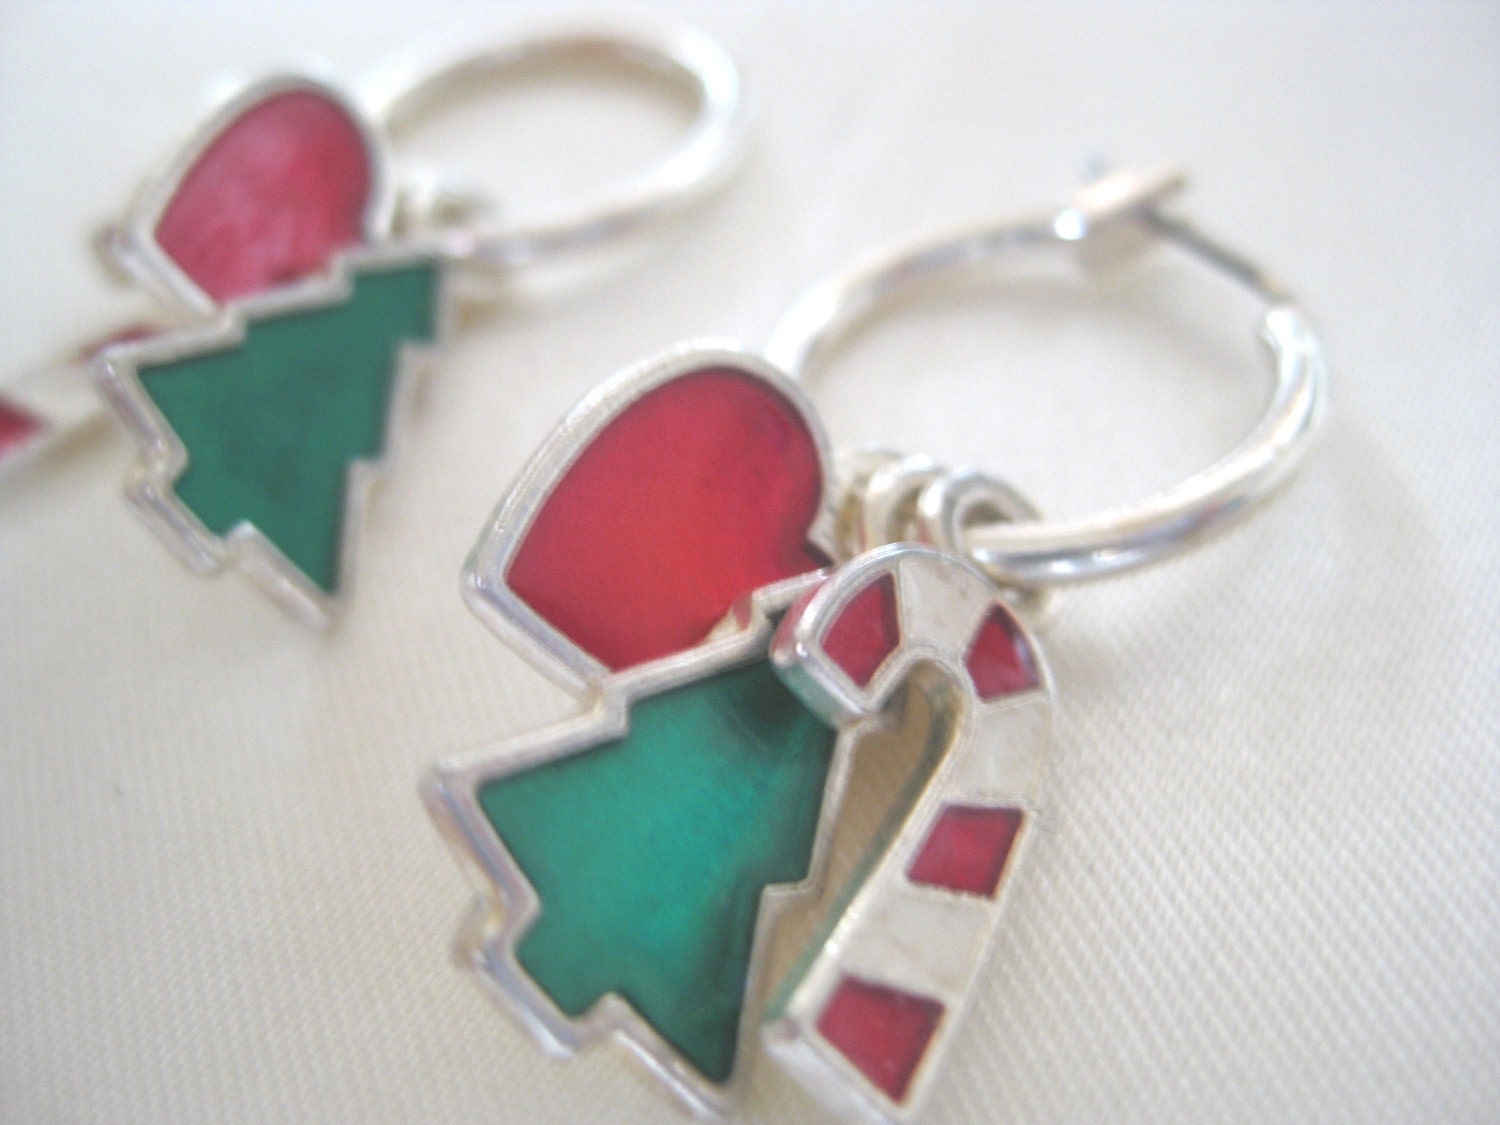 Vintage Christmas Earrings Silver Tone Hoop with Christmas Tree, Candy Cane and Heart FREE SHIPPING